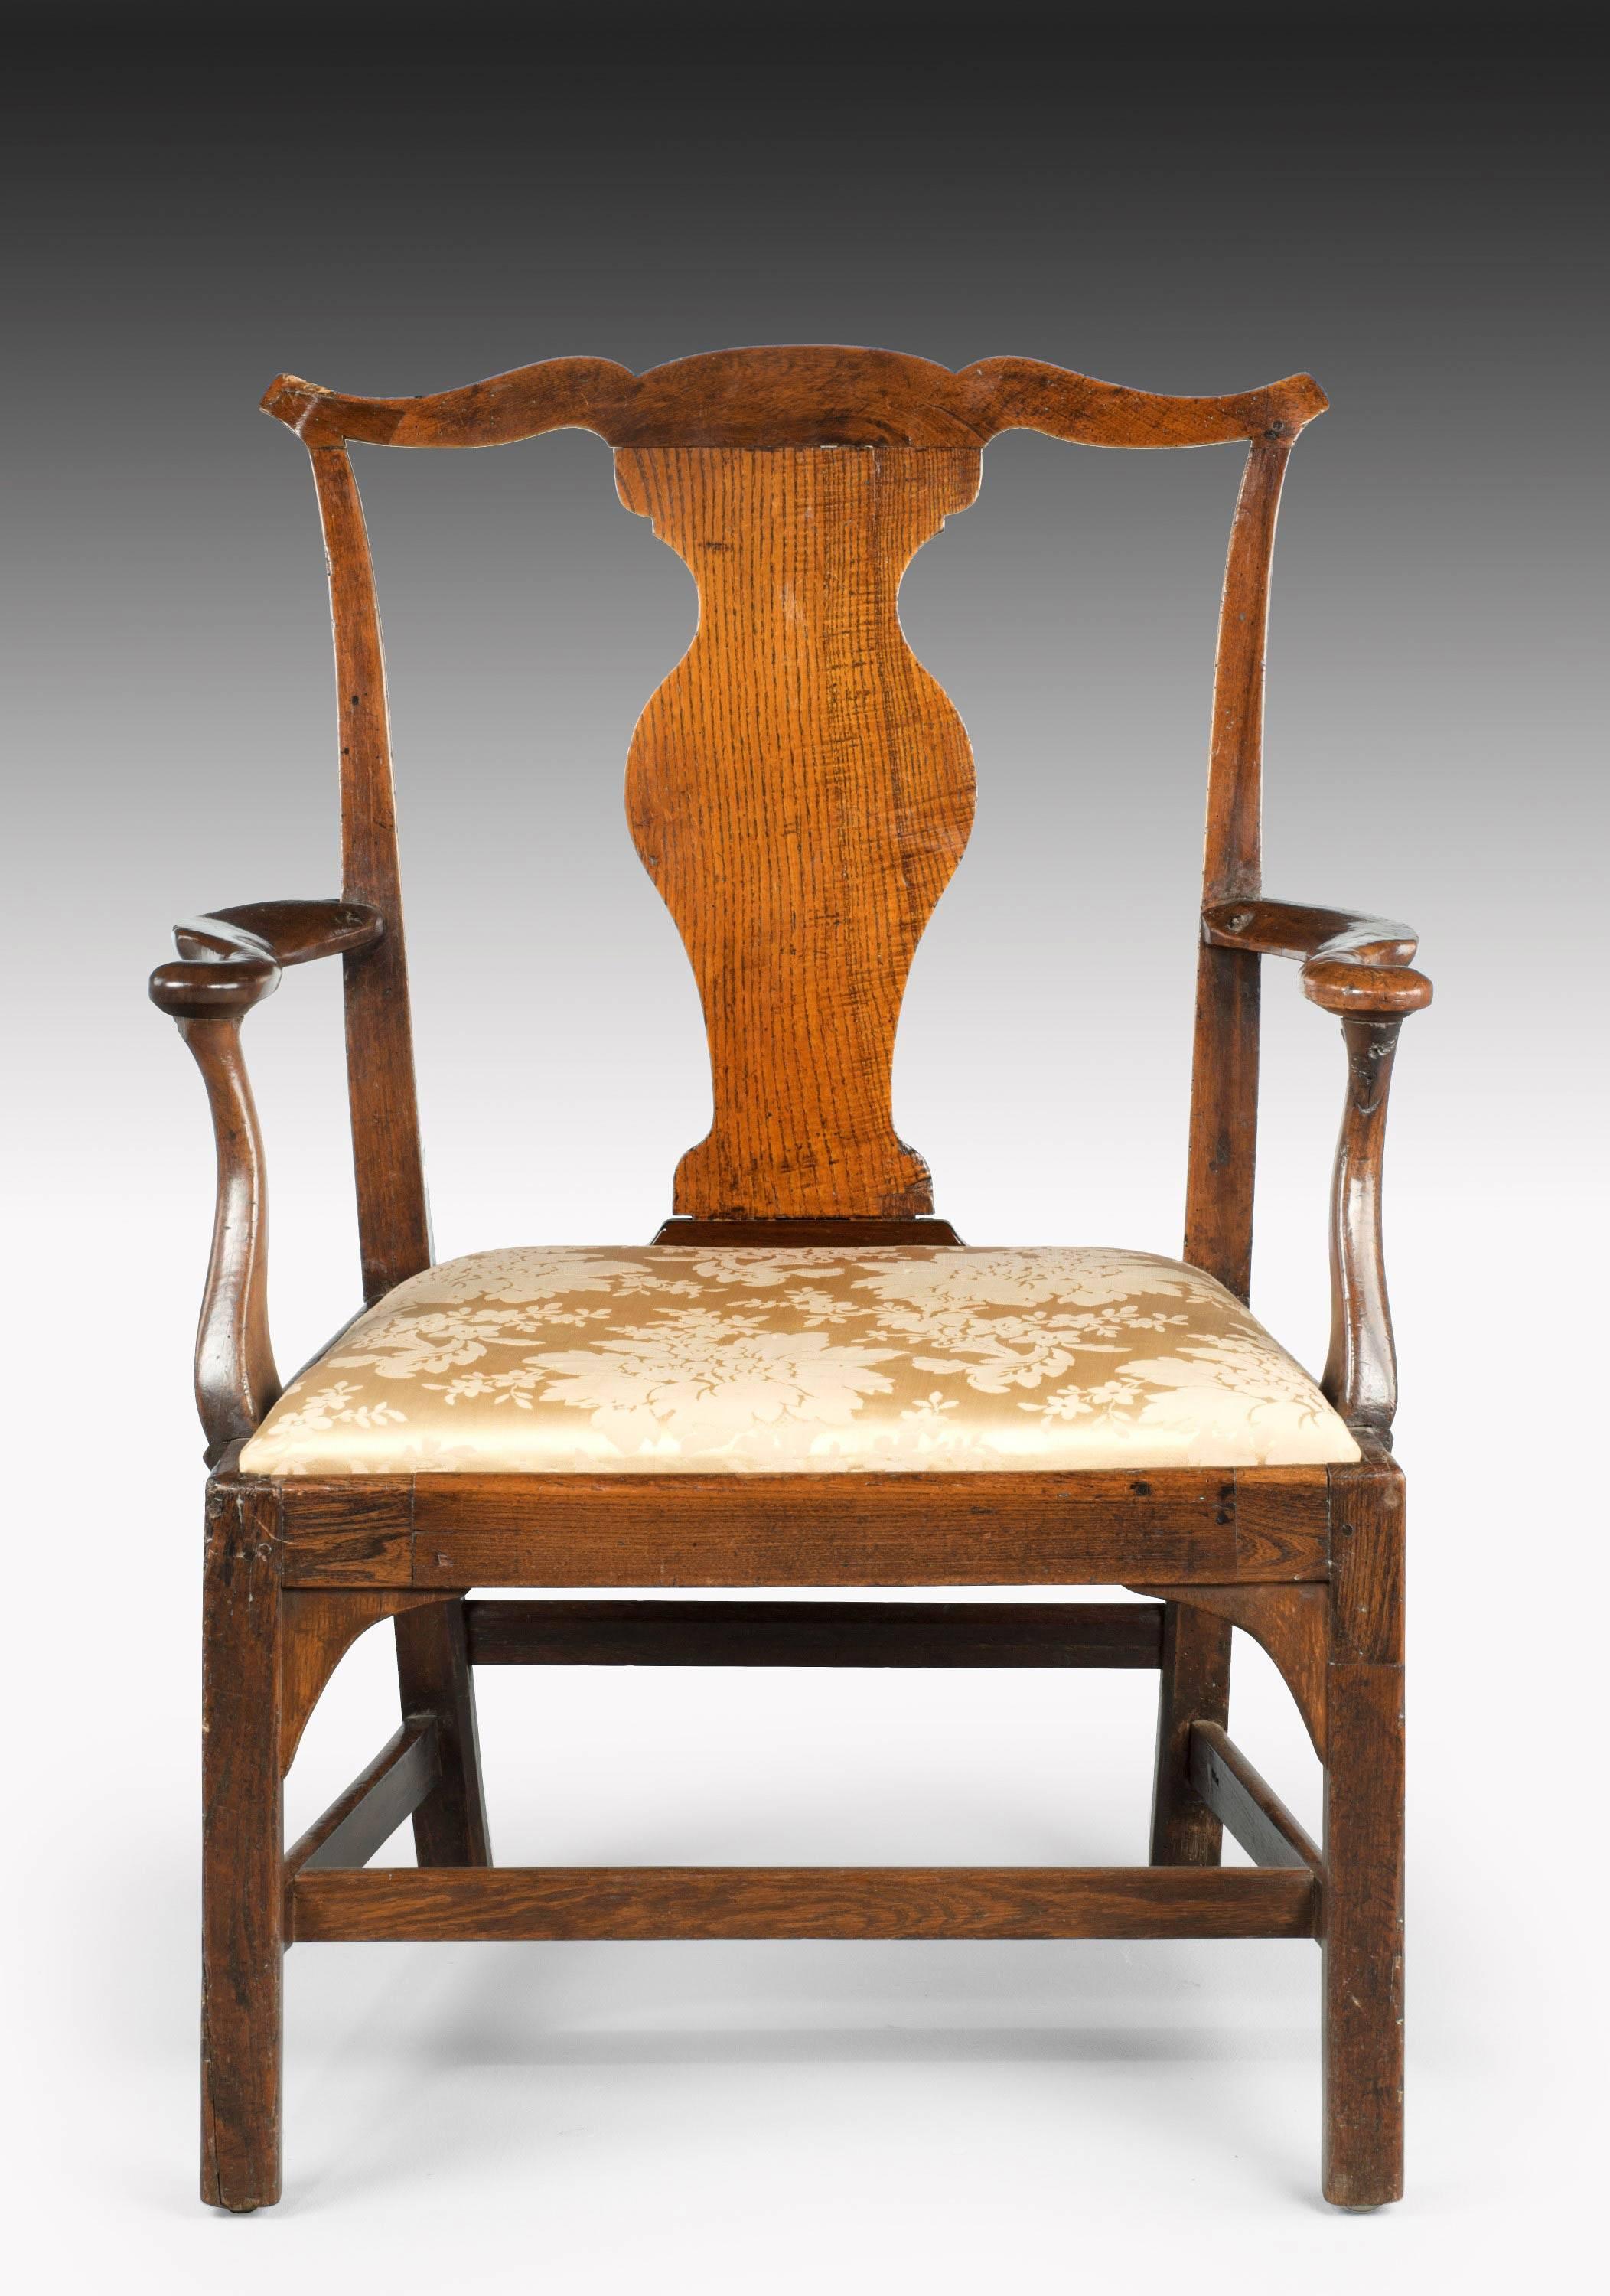 A good mid-18th century elbow chair of very substantial proportions. The wavy splat back beautifully figured under a serpentine top rail. Excellent flaring and shaping to the serpentine supports. 

Seat height 18 inches.